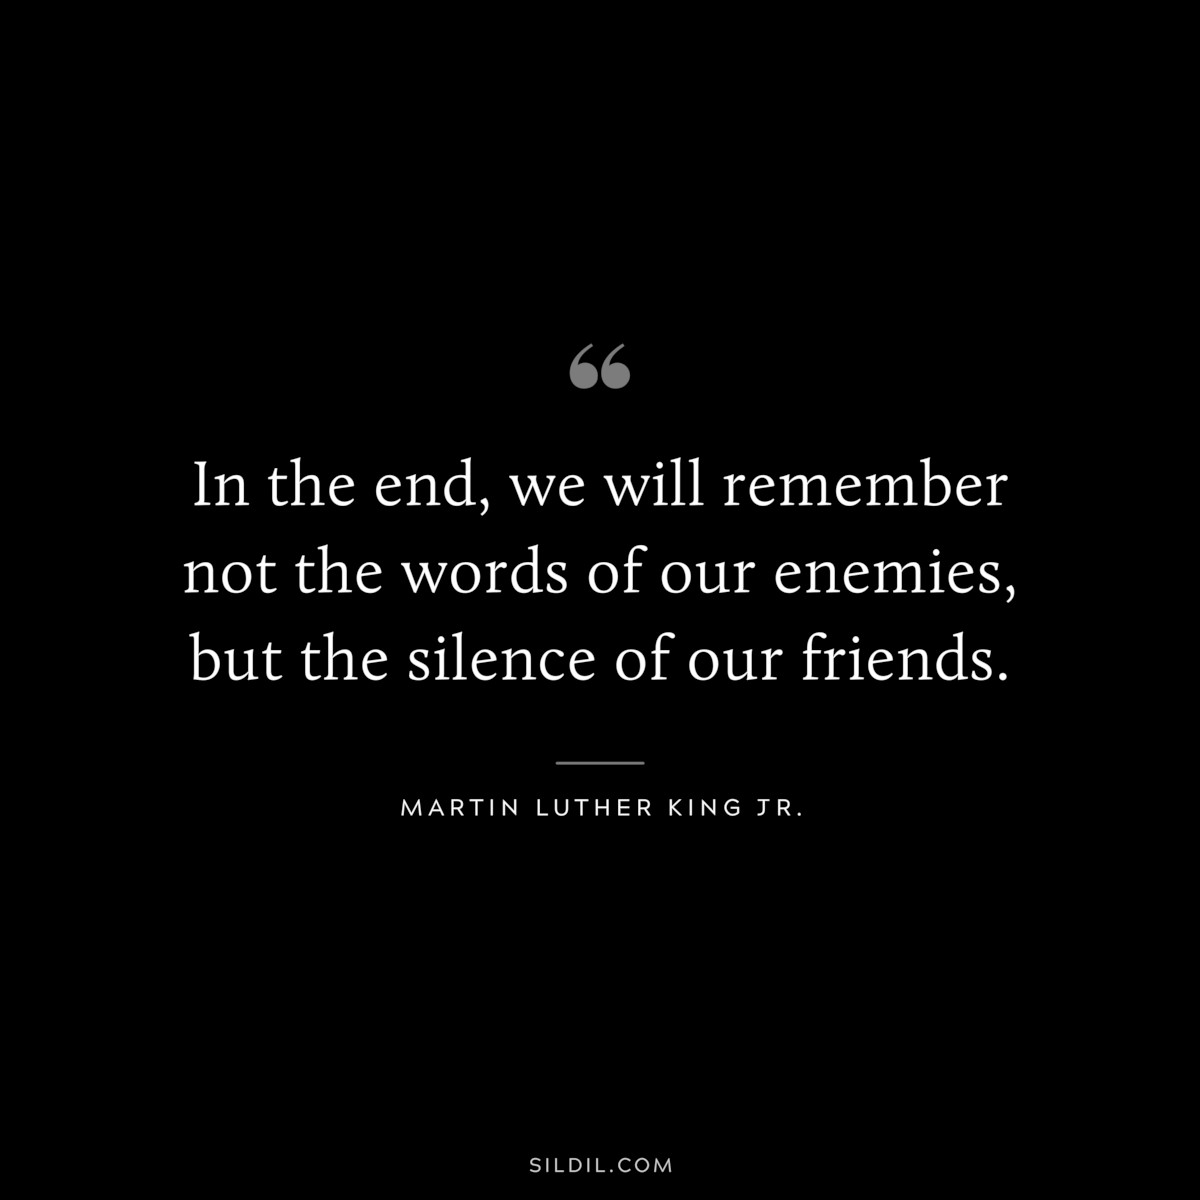 In the end, we will remember not the words of our enemies, but the silence of our friends. ― Martin Luther King Jr.